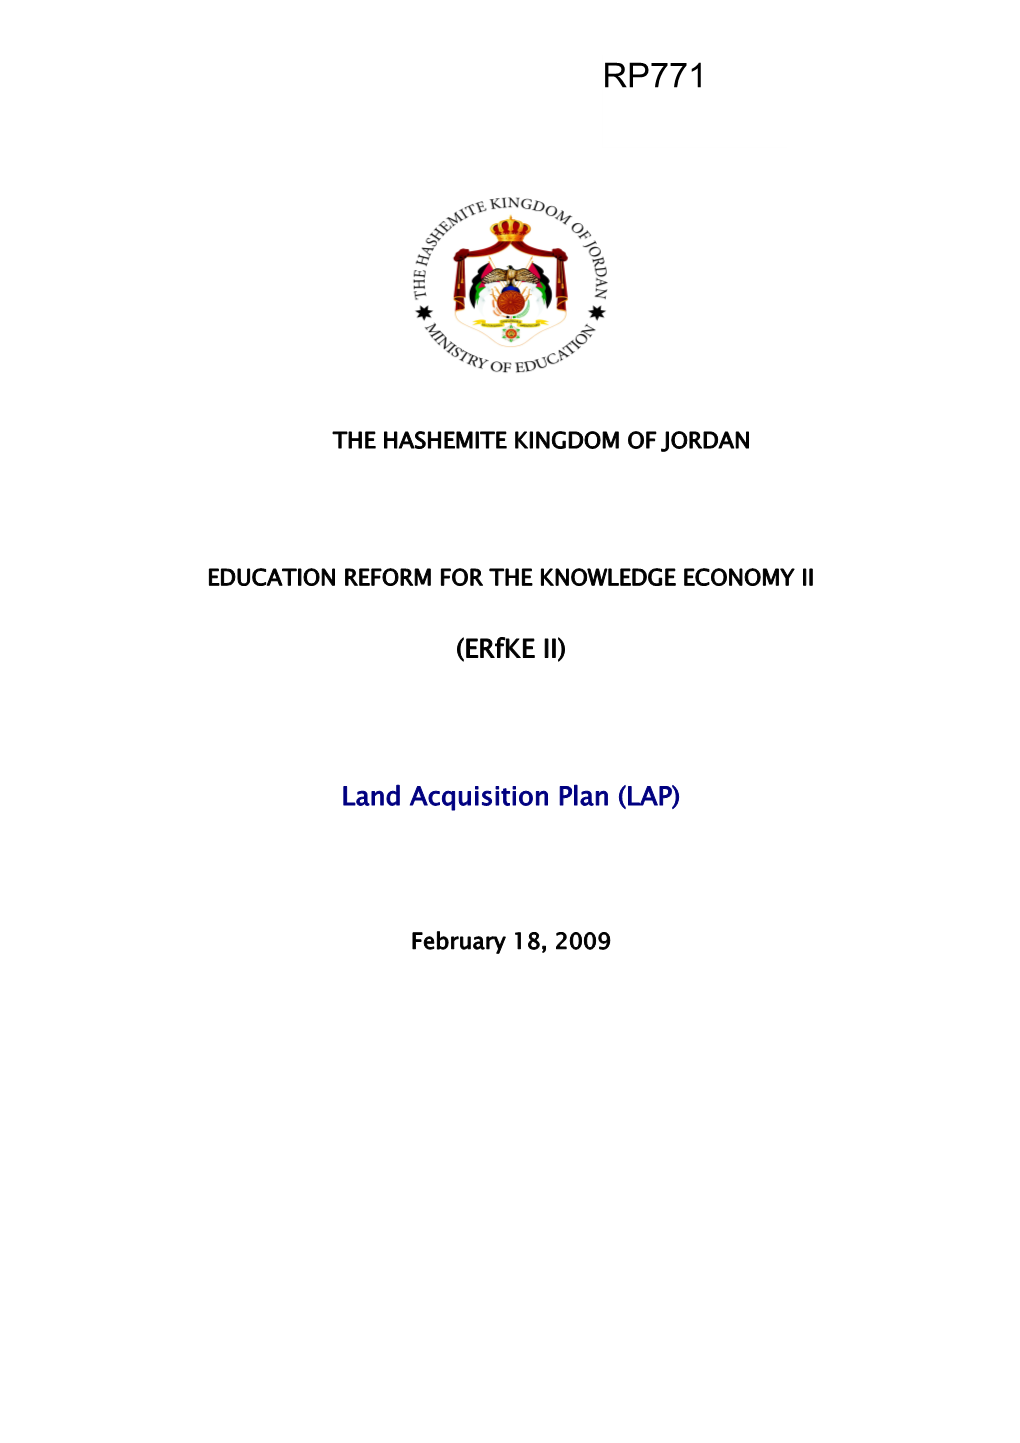 Education Reform for the Knowledge Economy Ii